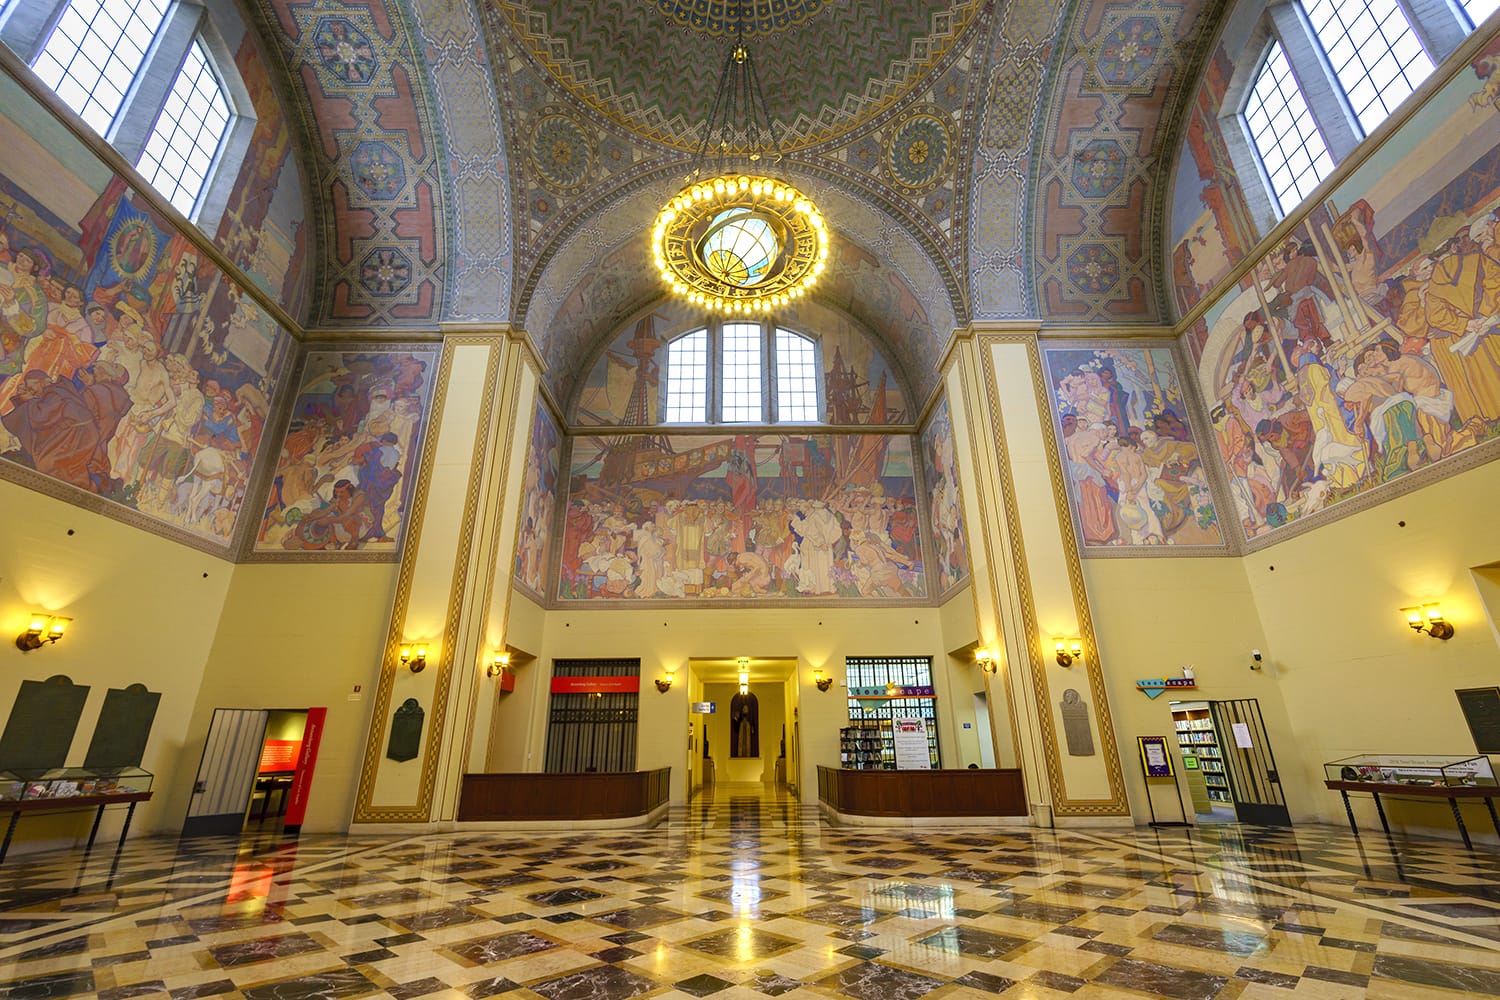 The Lodwrick M. Cook Rotunda of the Los Angeles Central Public Library in Los Angeles, California